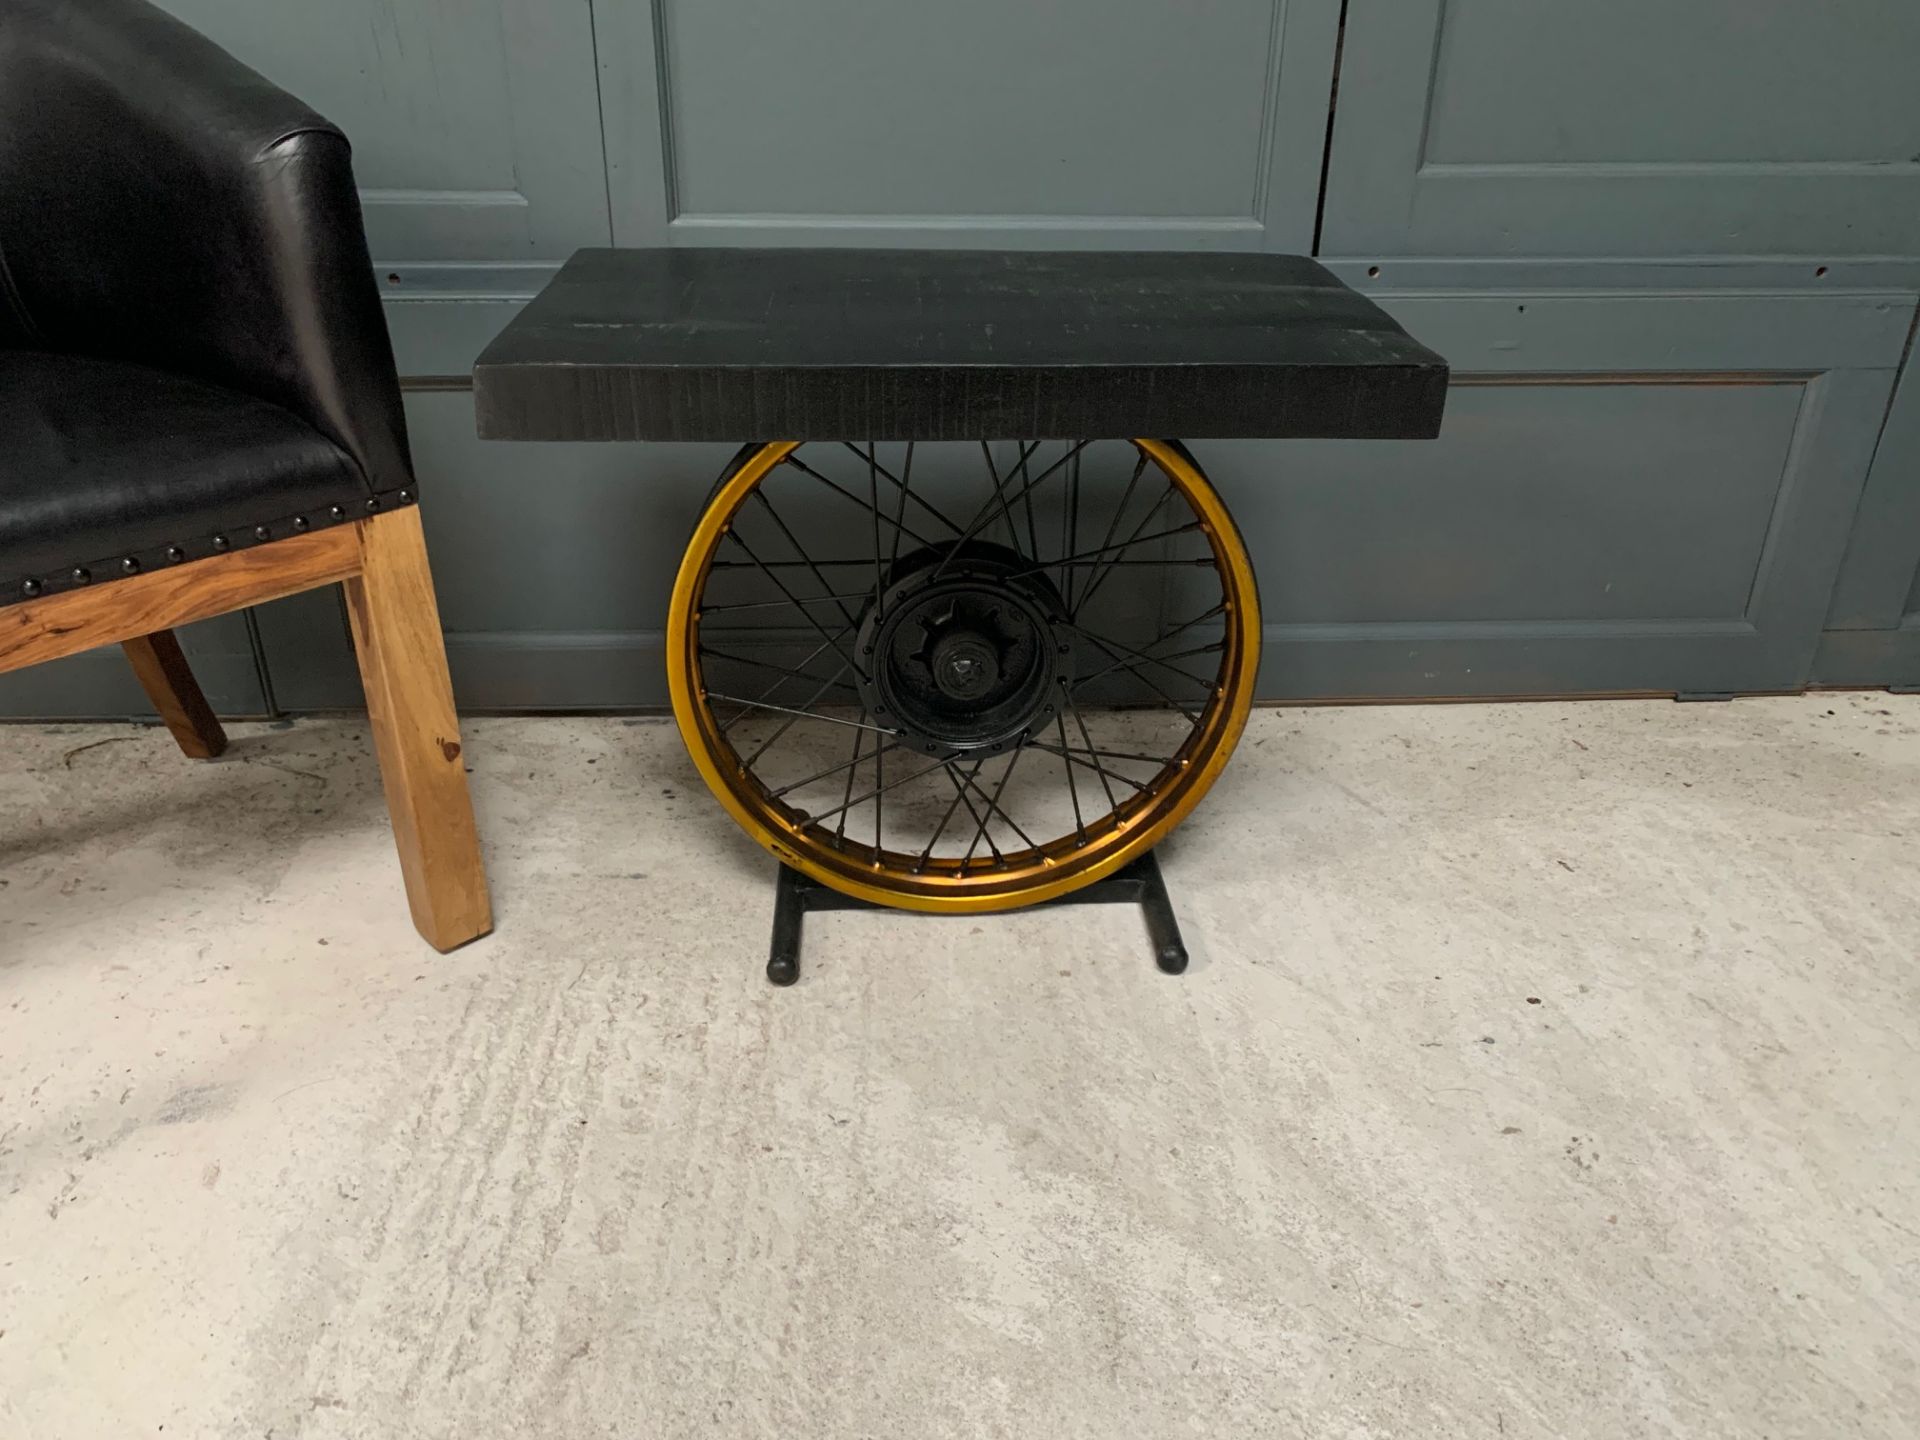 BOXED HANDMADE UPCYCLED ORIGINAL MOTORCYCLE WHEEL SIDE TABLE IN BLACK - Image 2 of 4